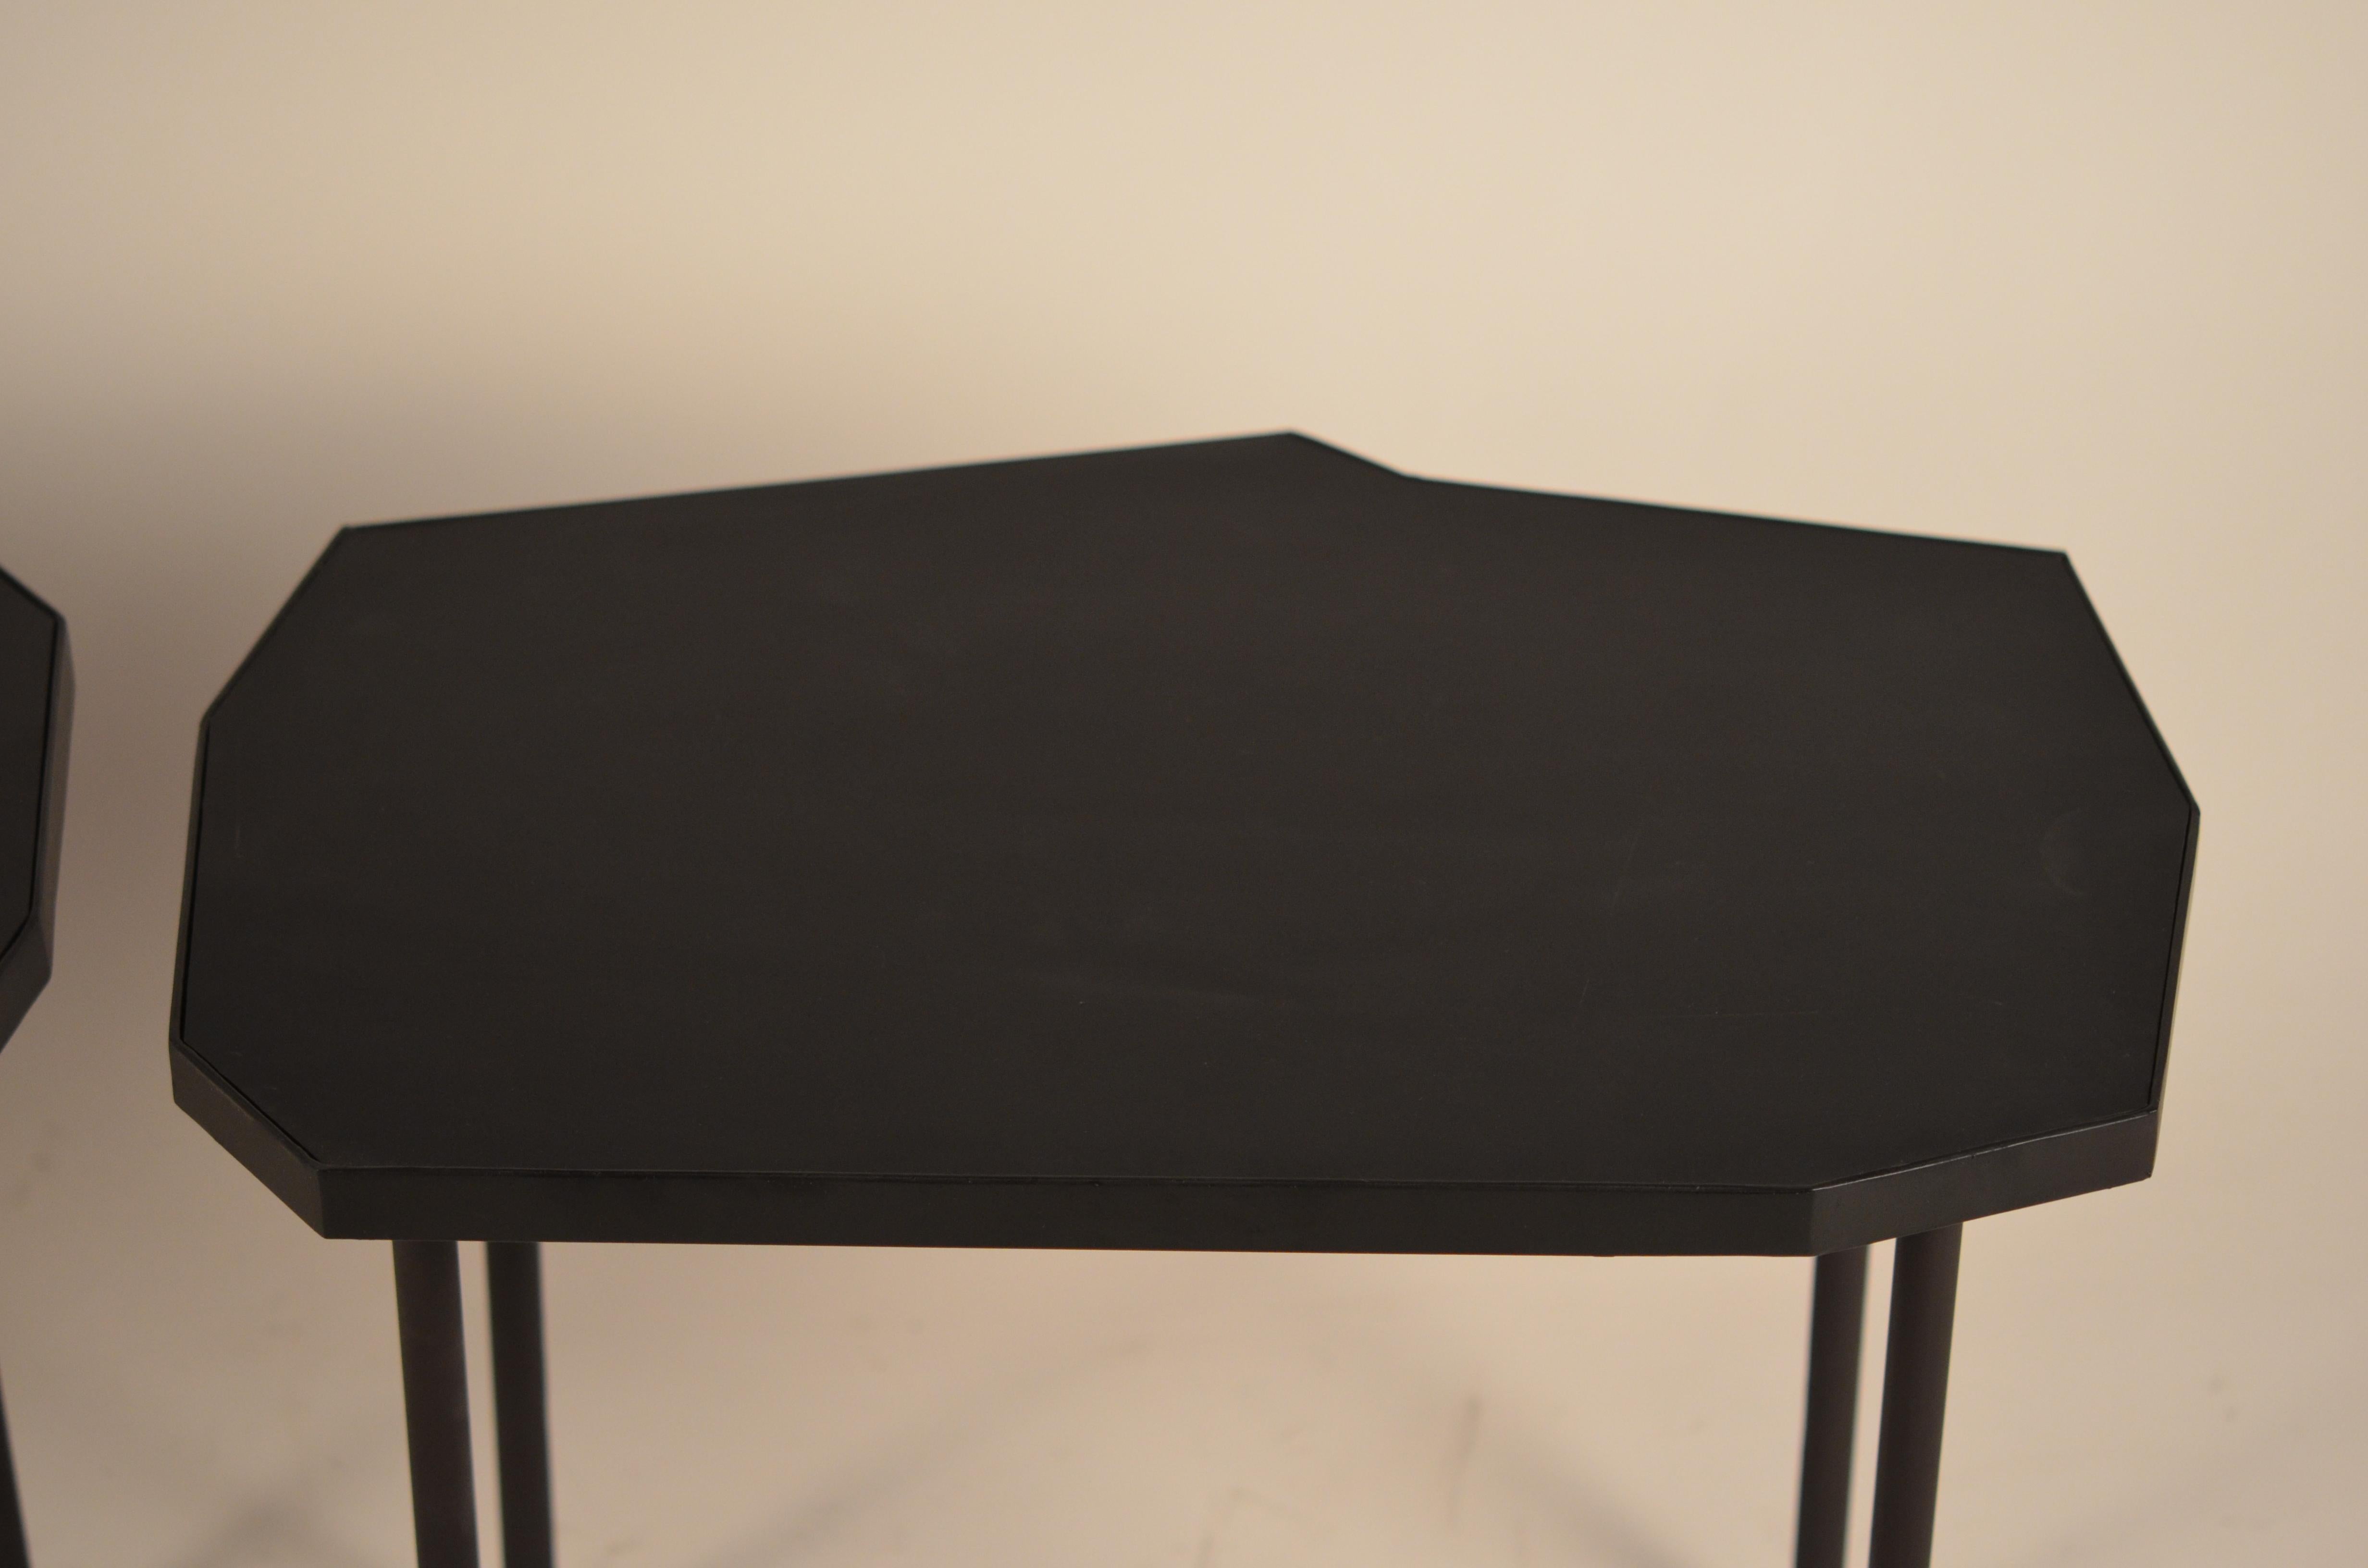 Pair of Asymmetrical 'Décagone' Black Leather Side Tables by Design Frères For Sale 2